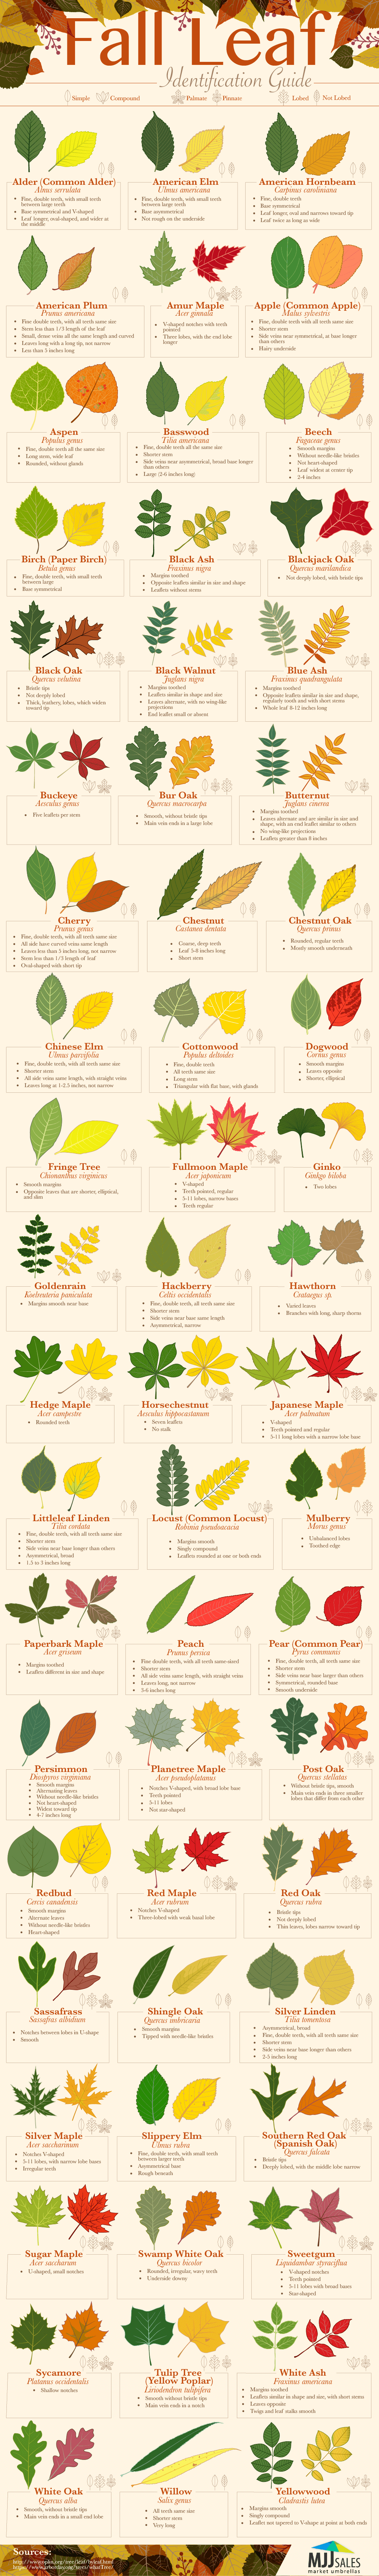 fall-leaf-identification-guide-daily-infographic